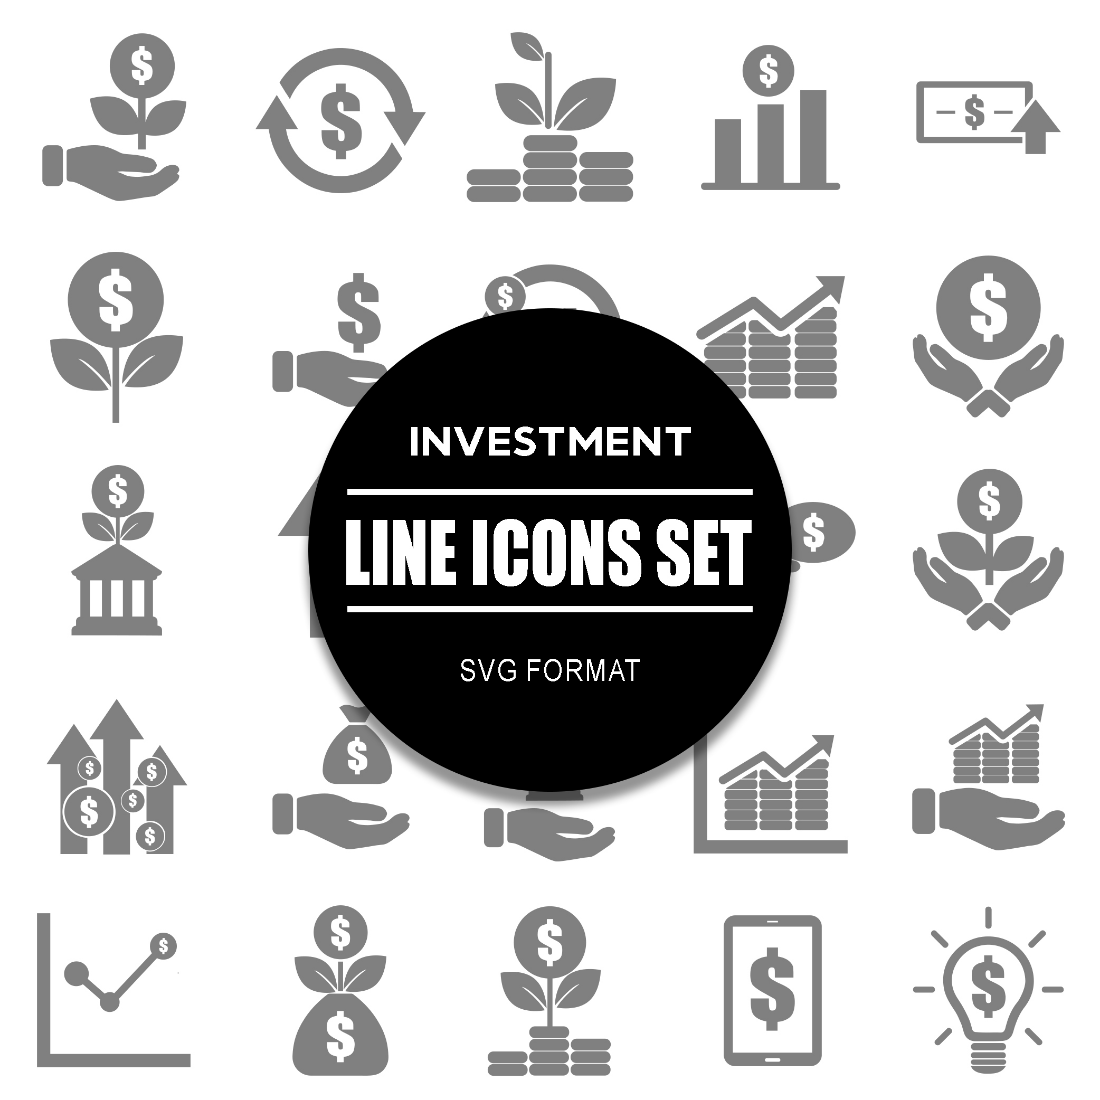 Investment Icon Set cover image.